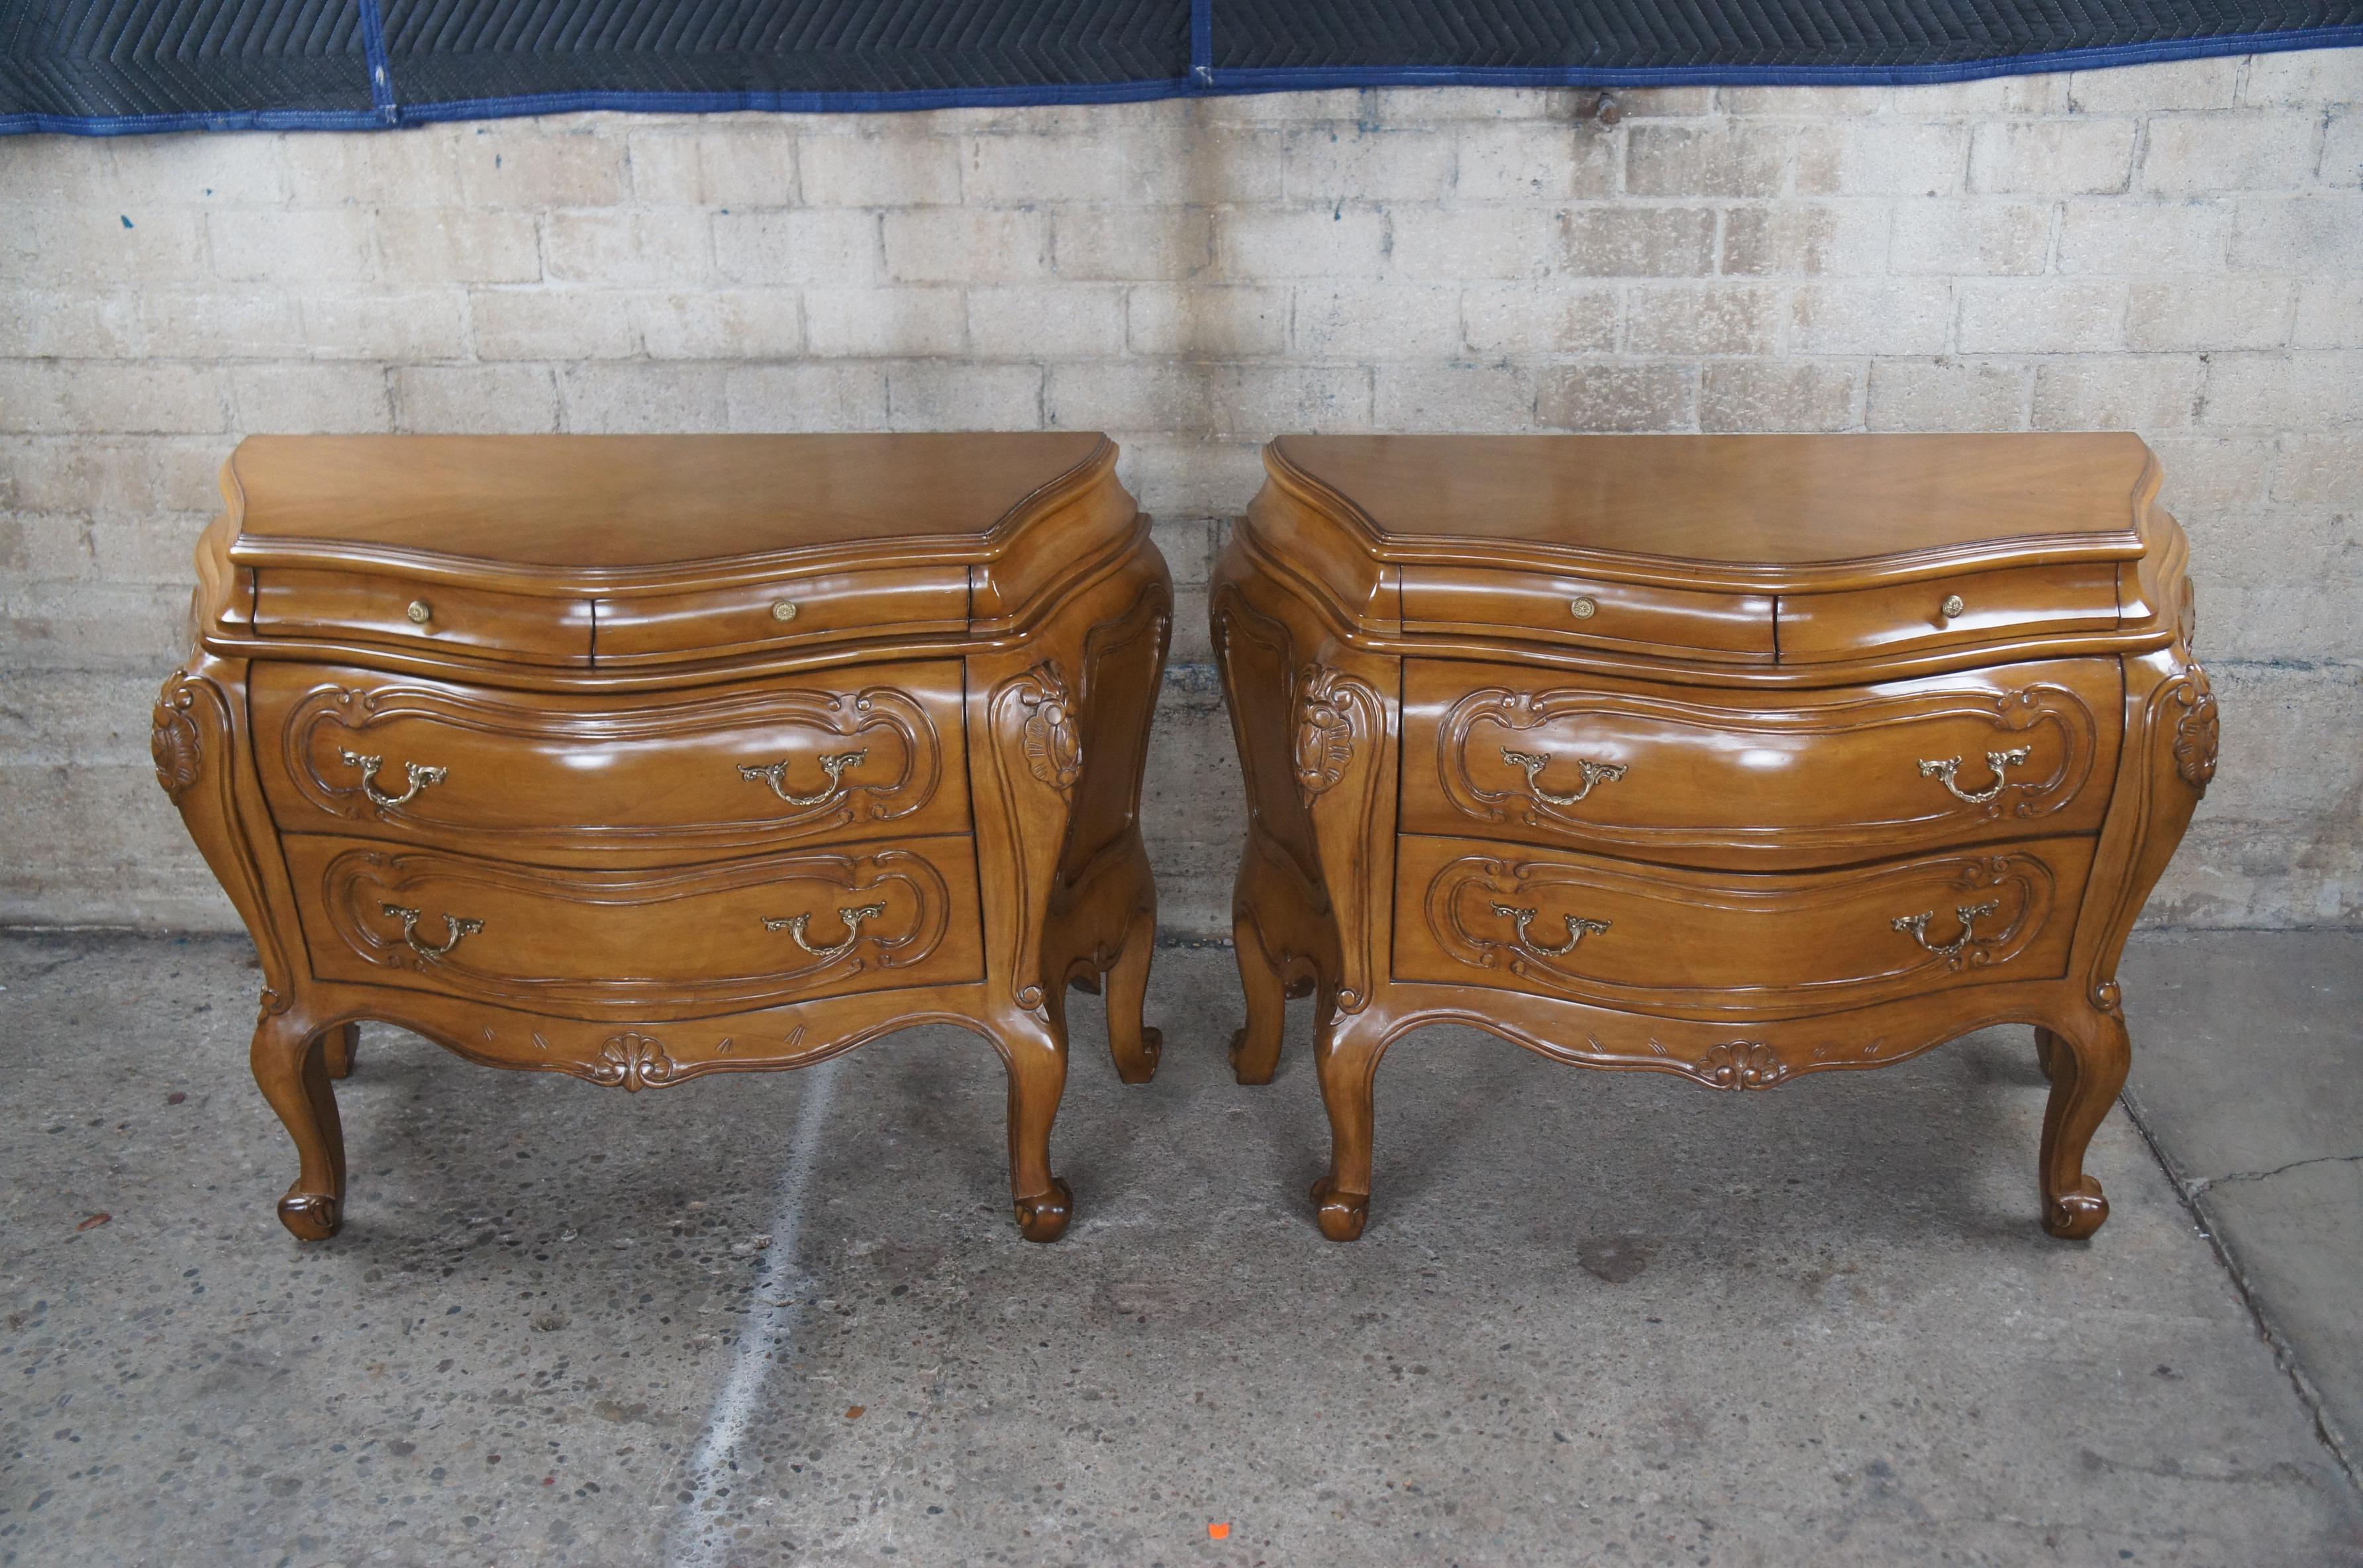 2 Vintage Italian Walnut Serpentine Bow Front Bombe Chests Commodes Nightstands For Sale 7